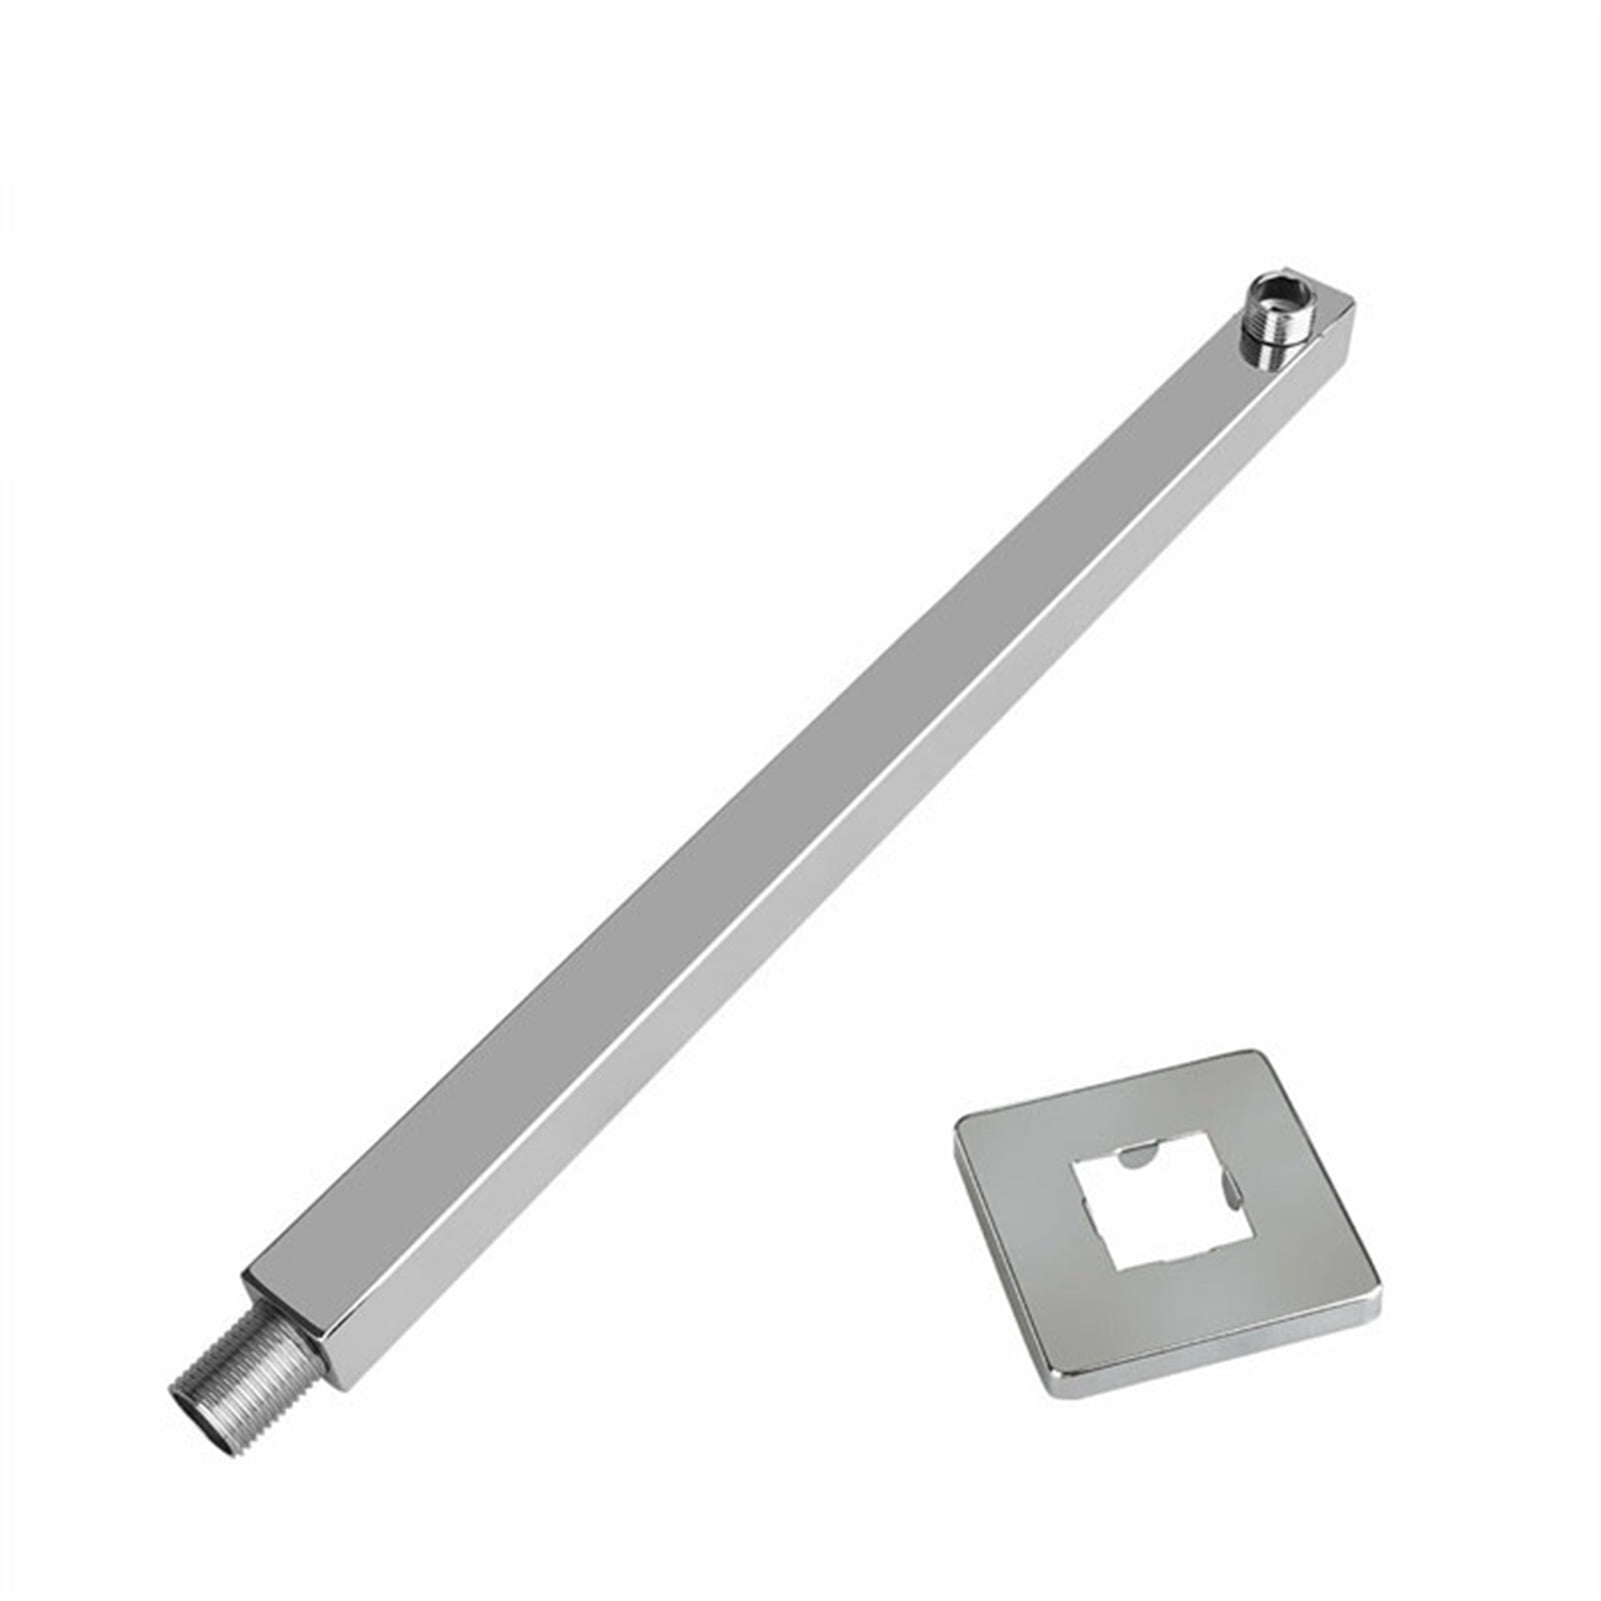 16-inch Stainless Steel Square Rainfall Shower Head Extension Arm Wall Mounted 